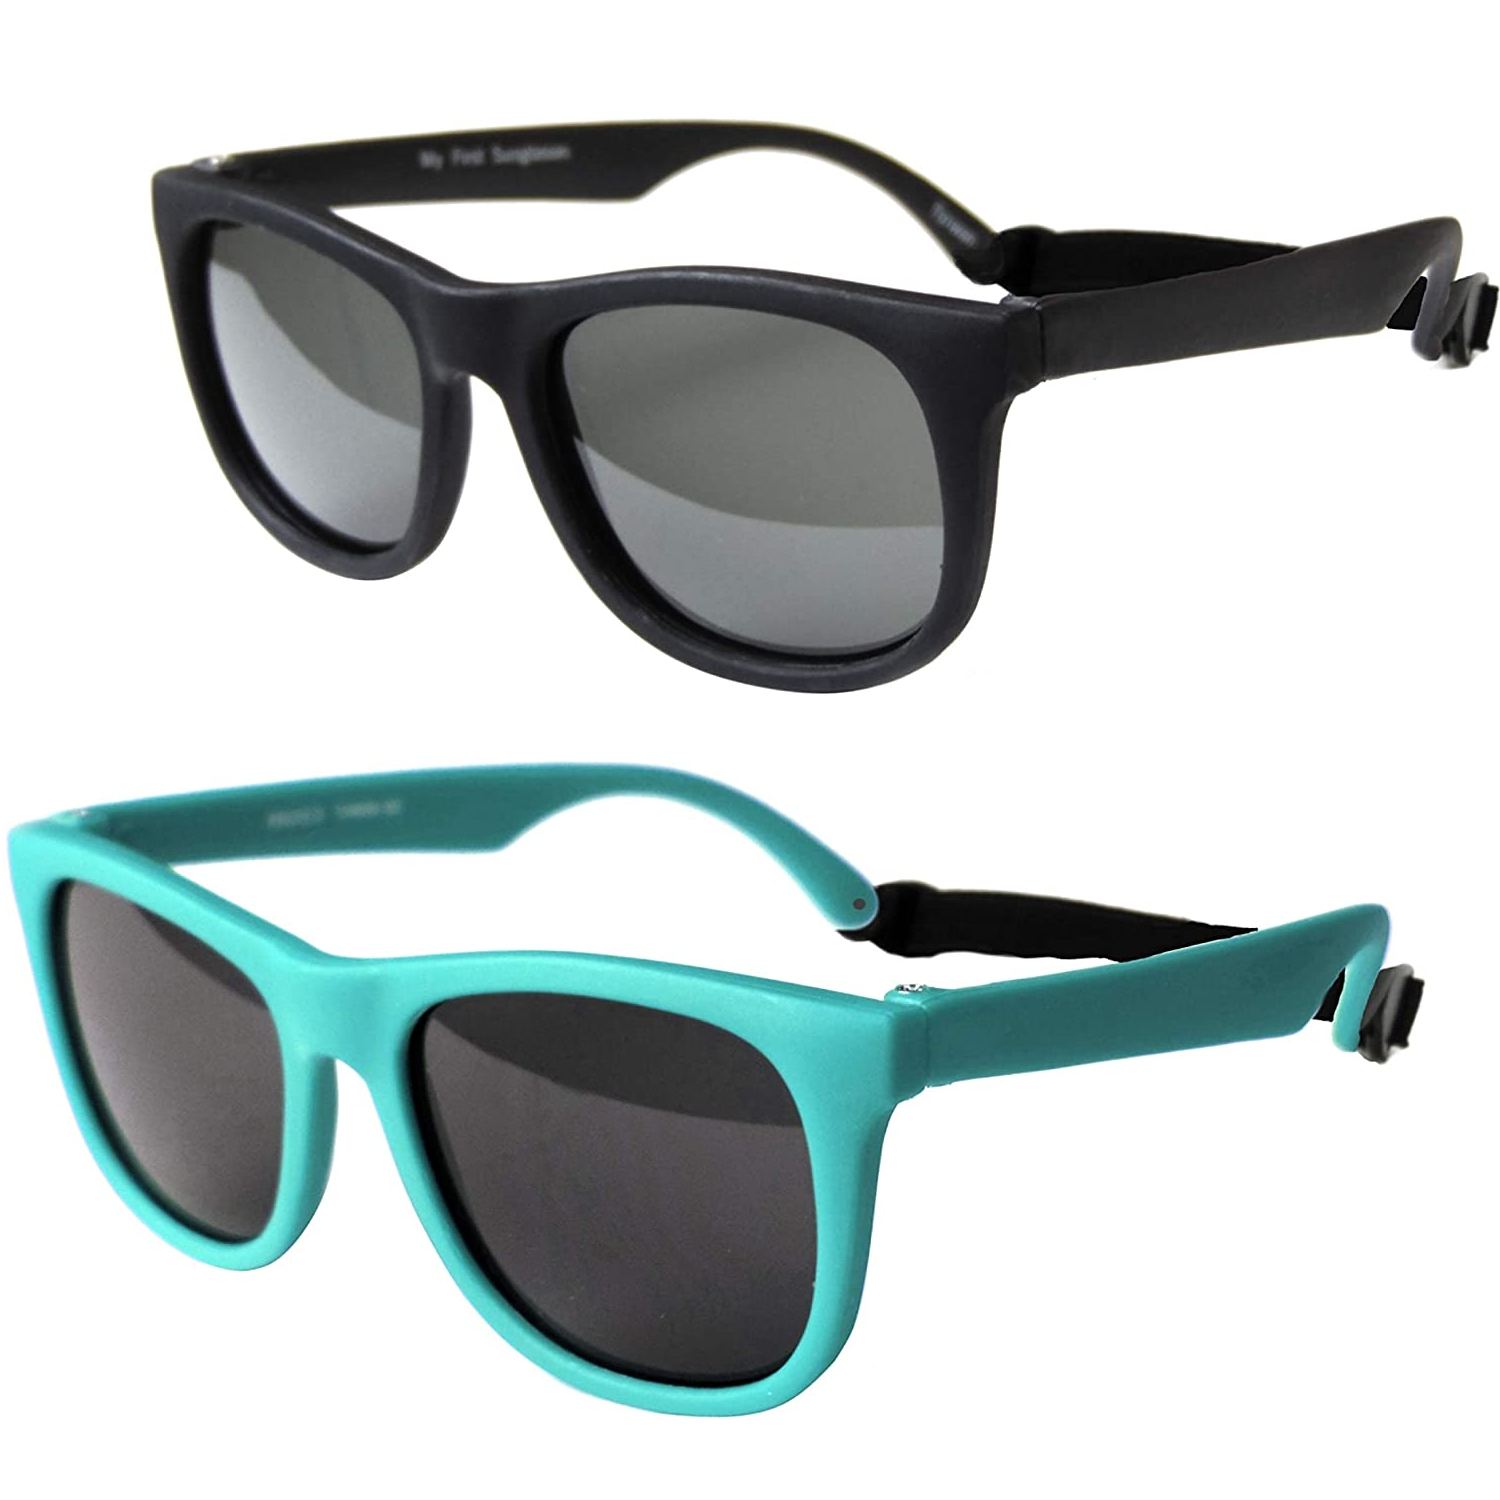 First Sunglasses For Babies From 0 To 1 Year